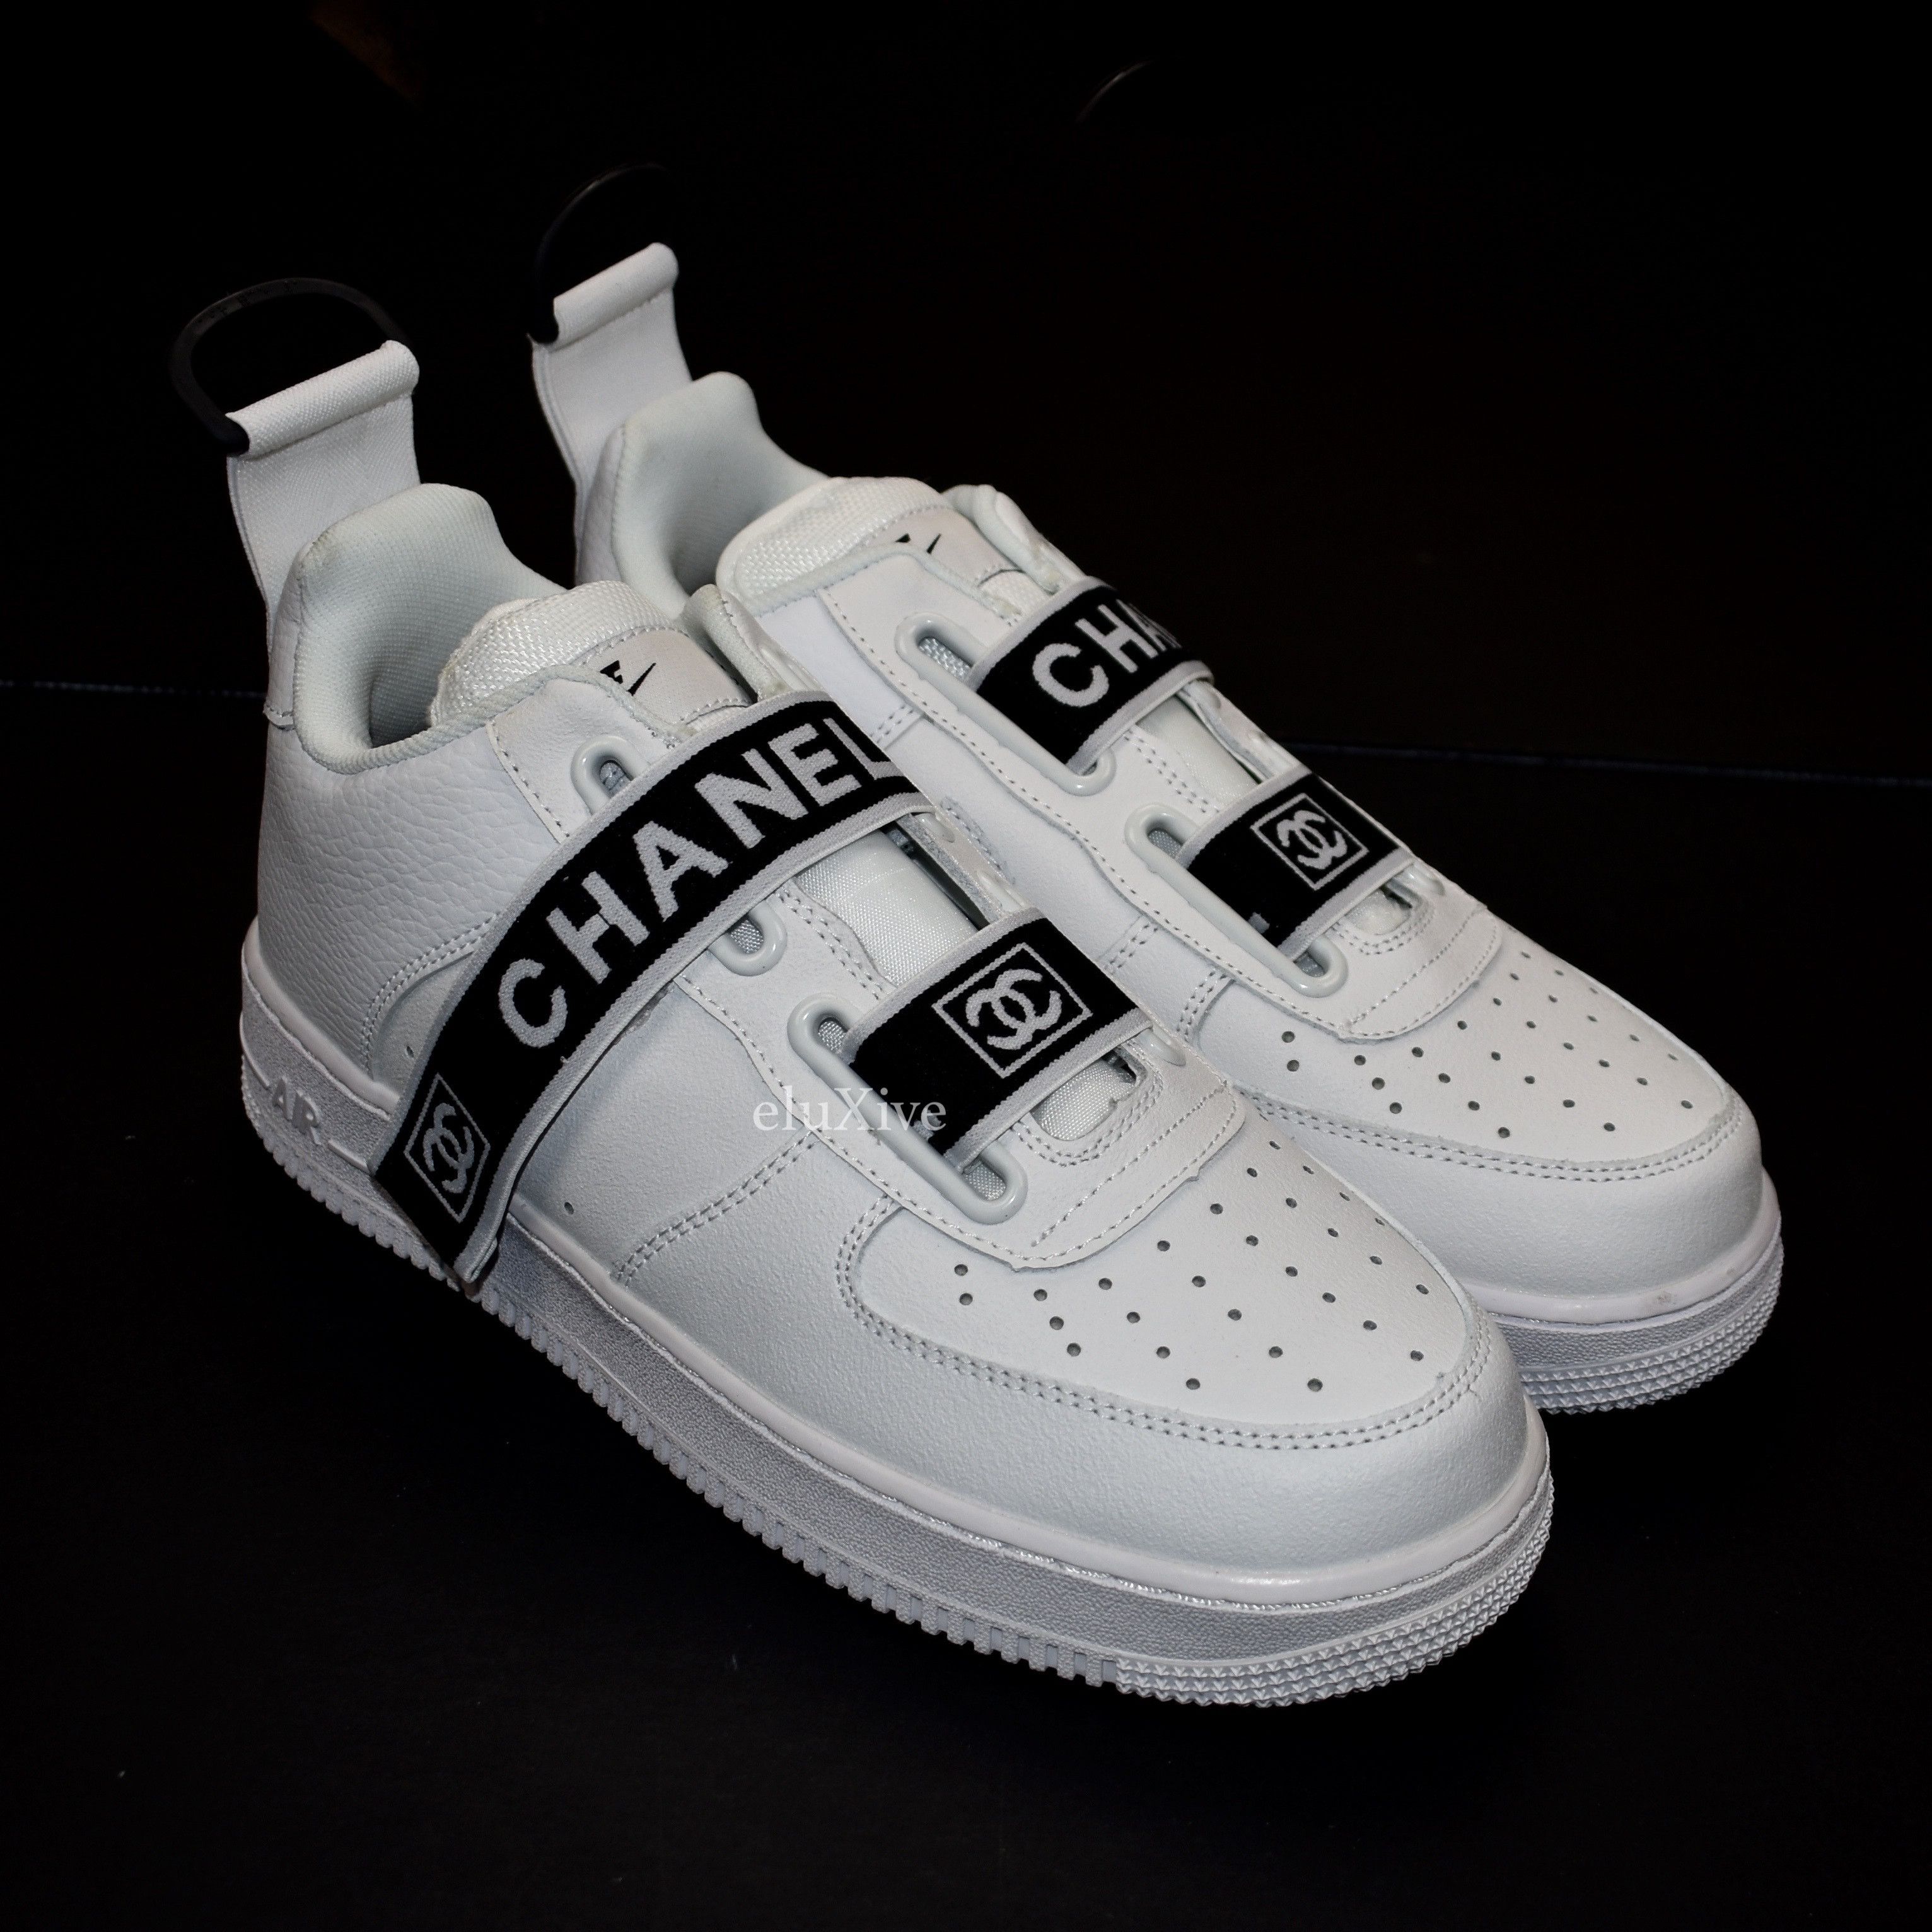 Vandy The Pink Nike Air Force 1 Billie Eilish Rolling Stone White DS |  Grailed